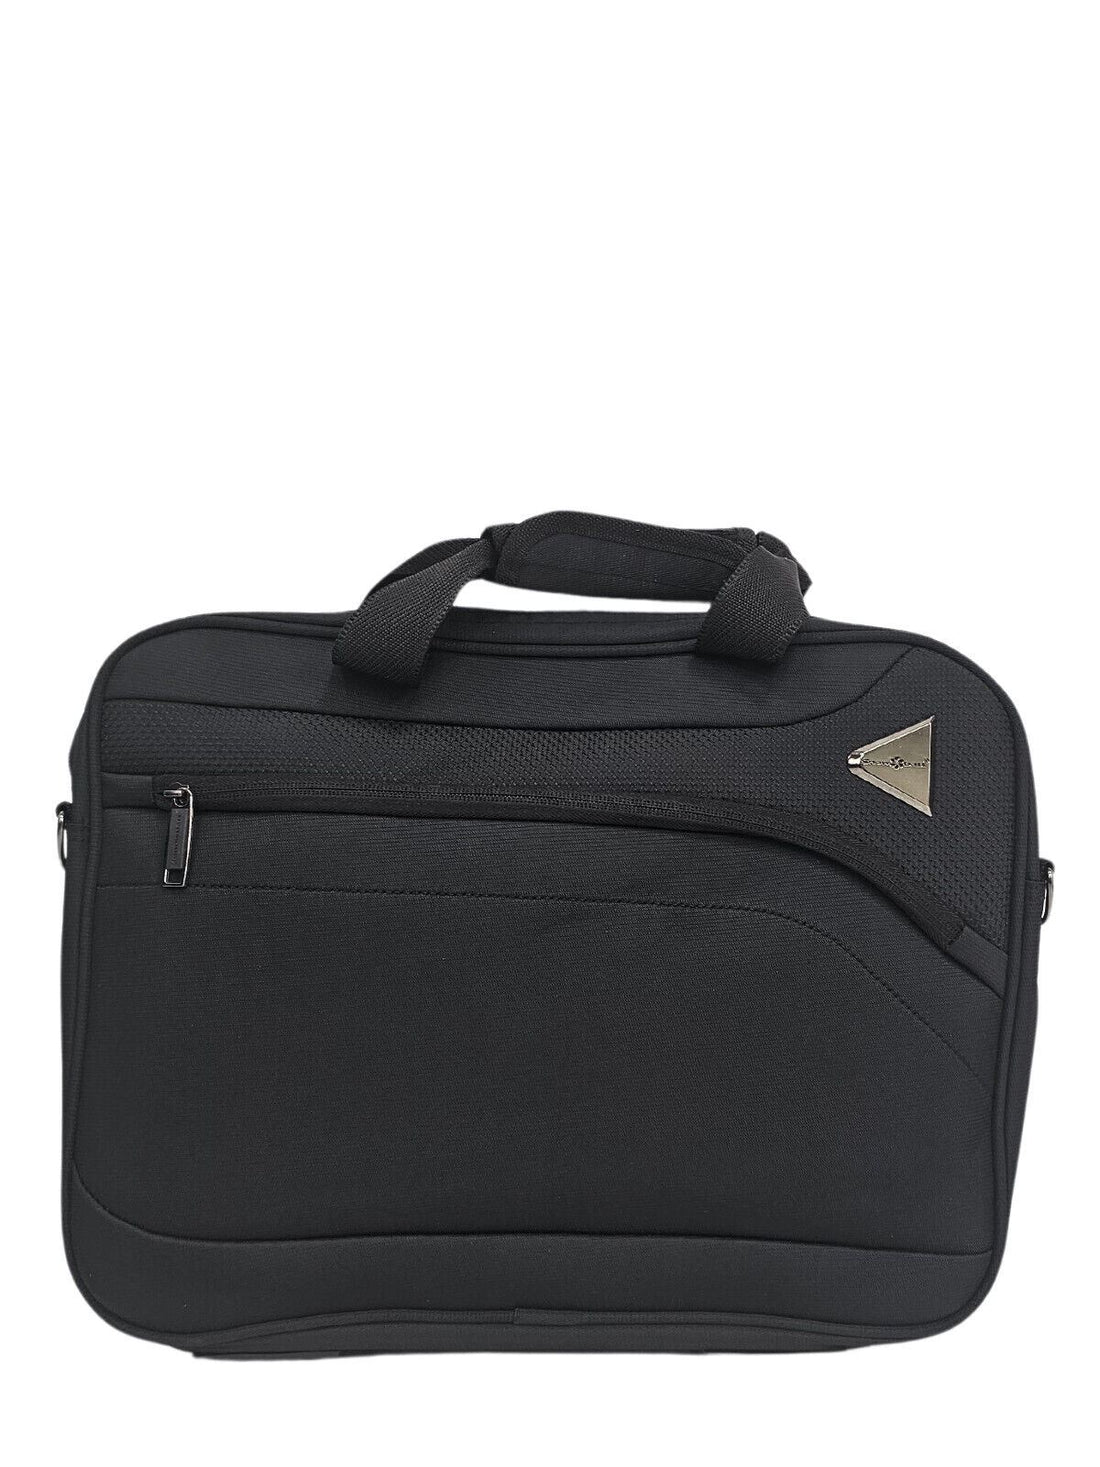 Clayton Laptop Soft Shell Suitcase in Black